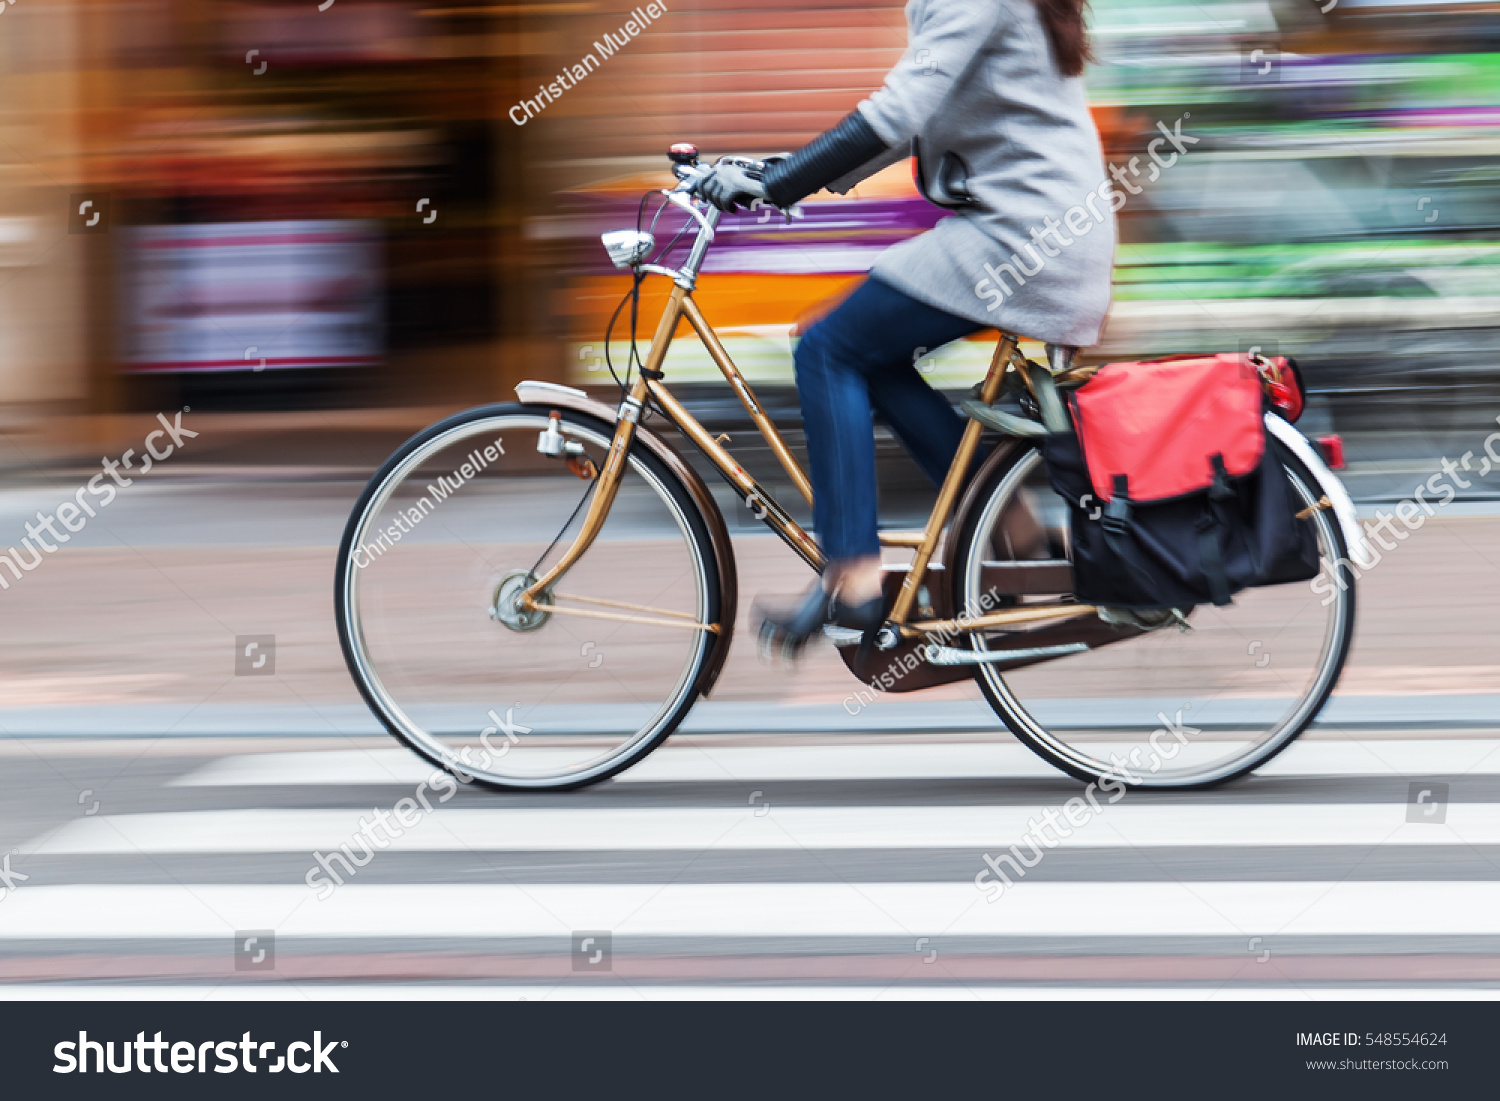 bicycle rider in the city in motion blur #548554624